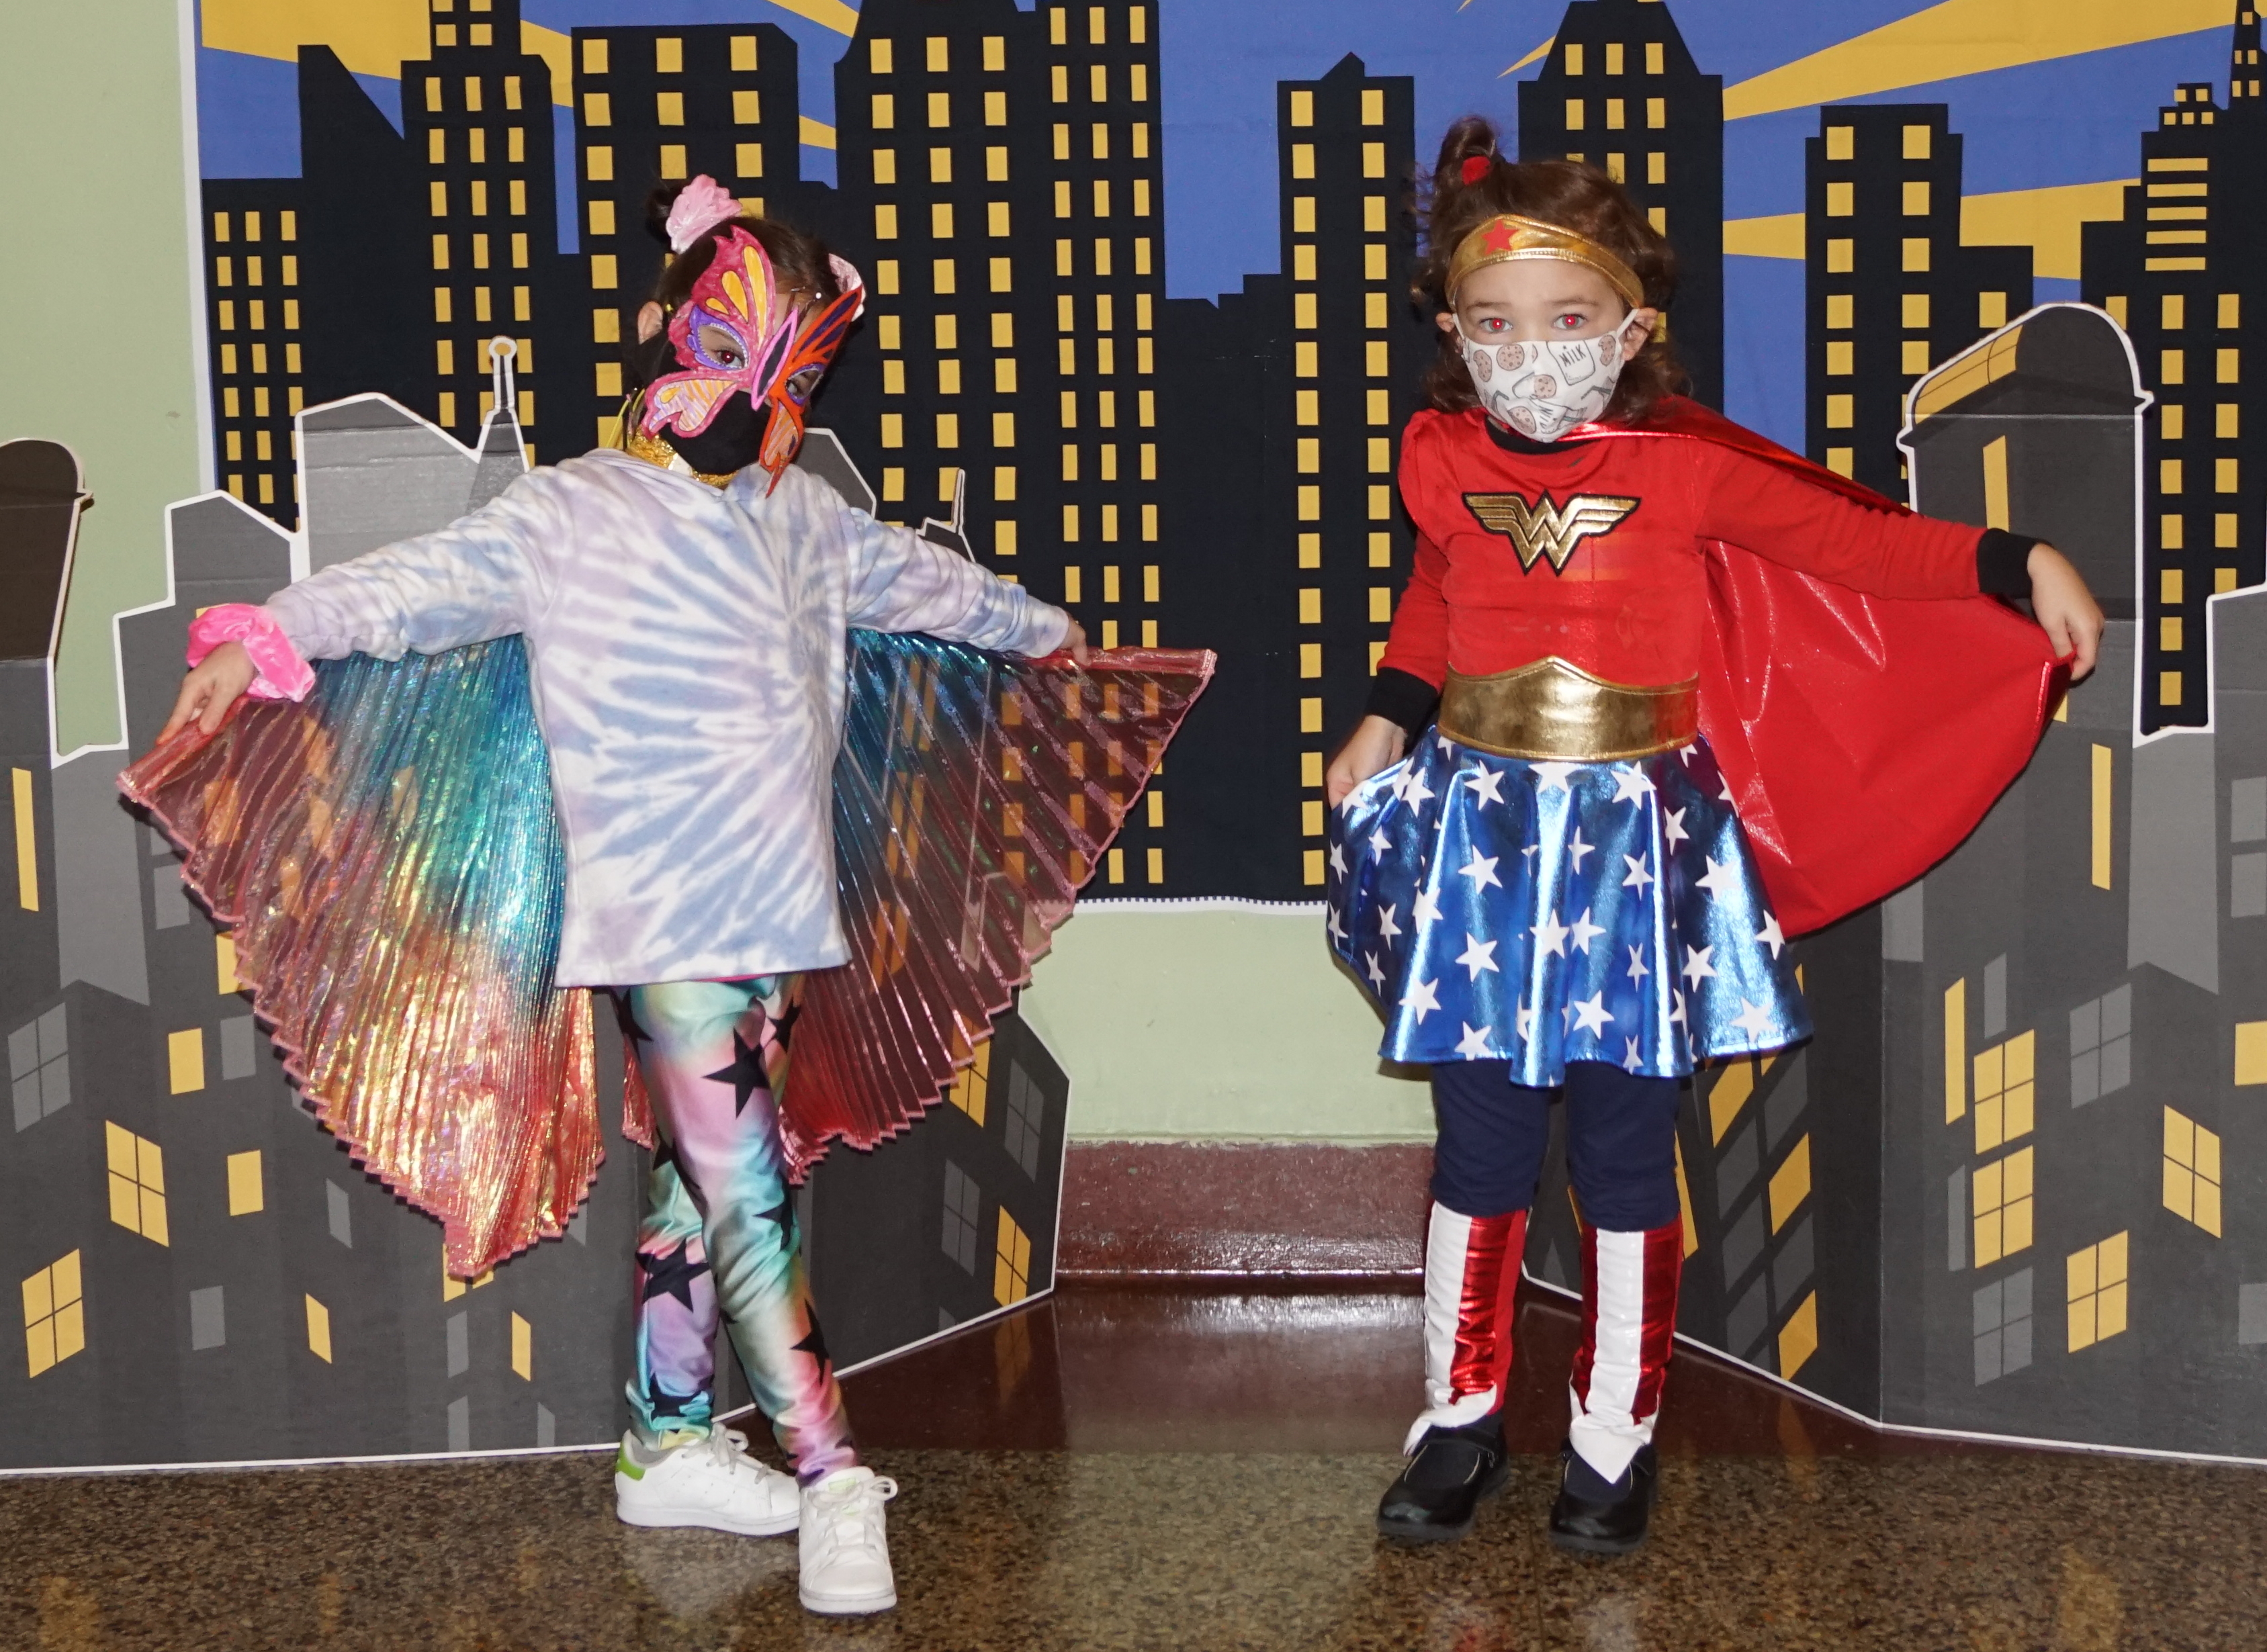 Lower Schoolers enjoyed showing off their costumes!